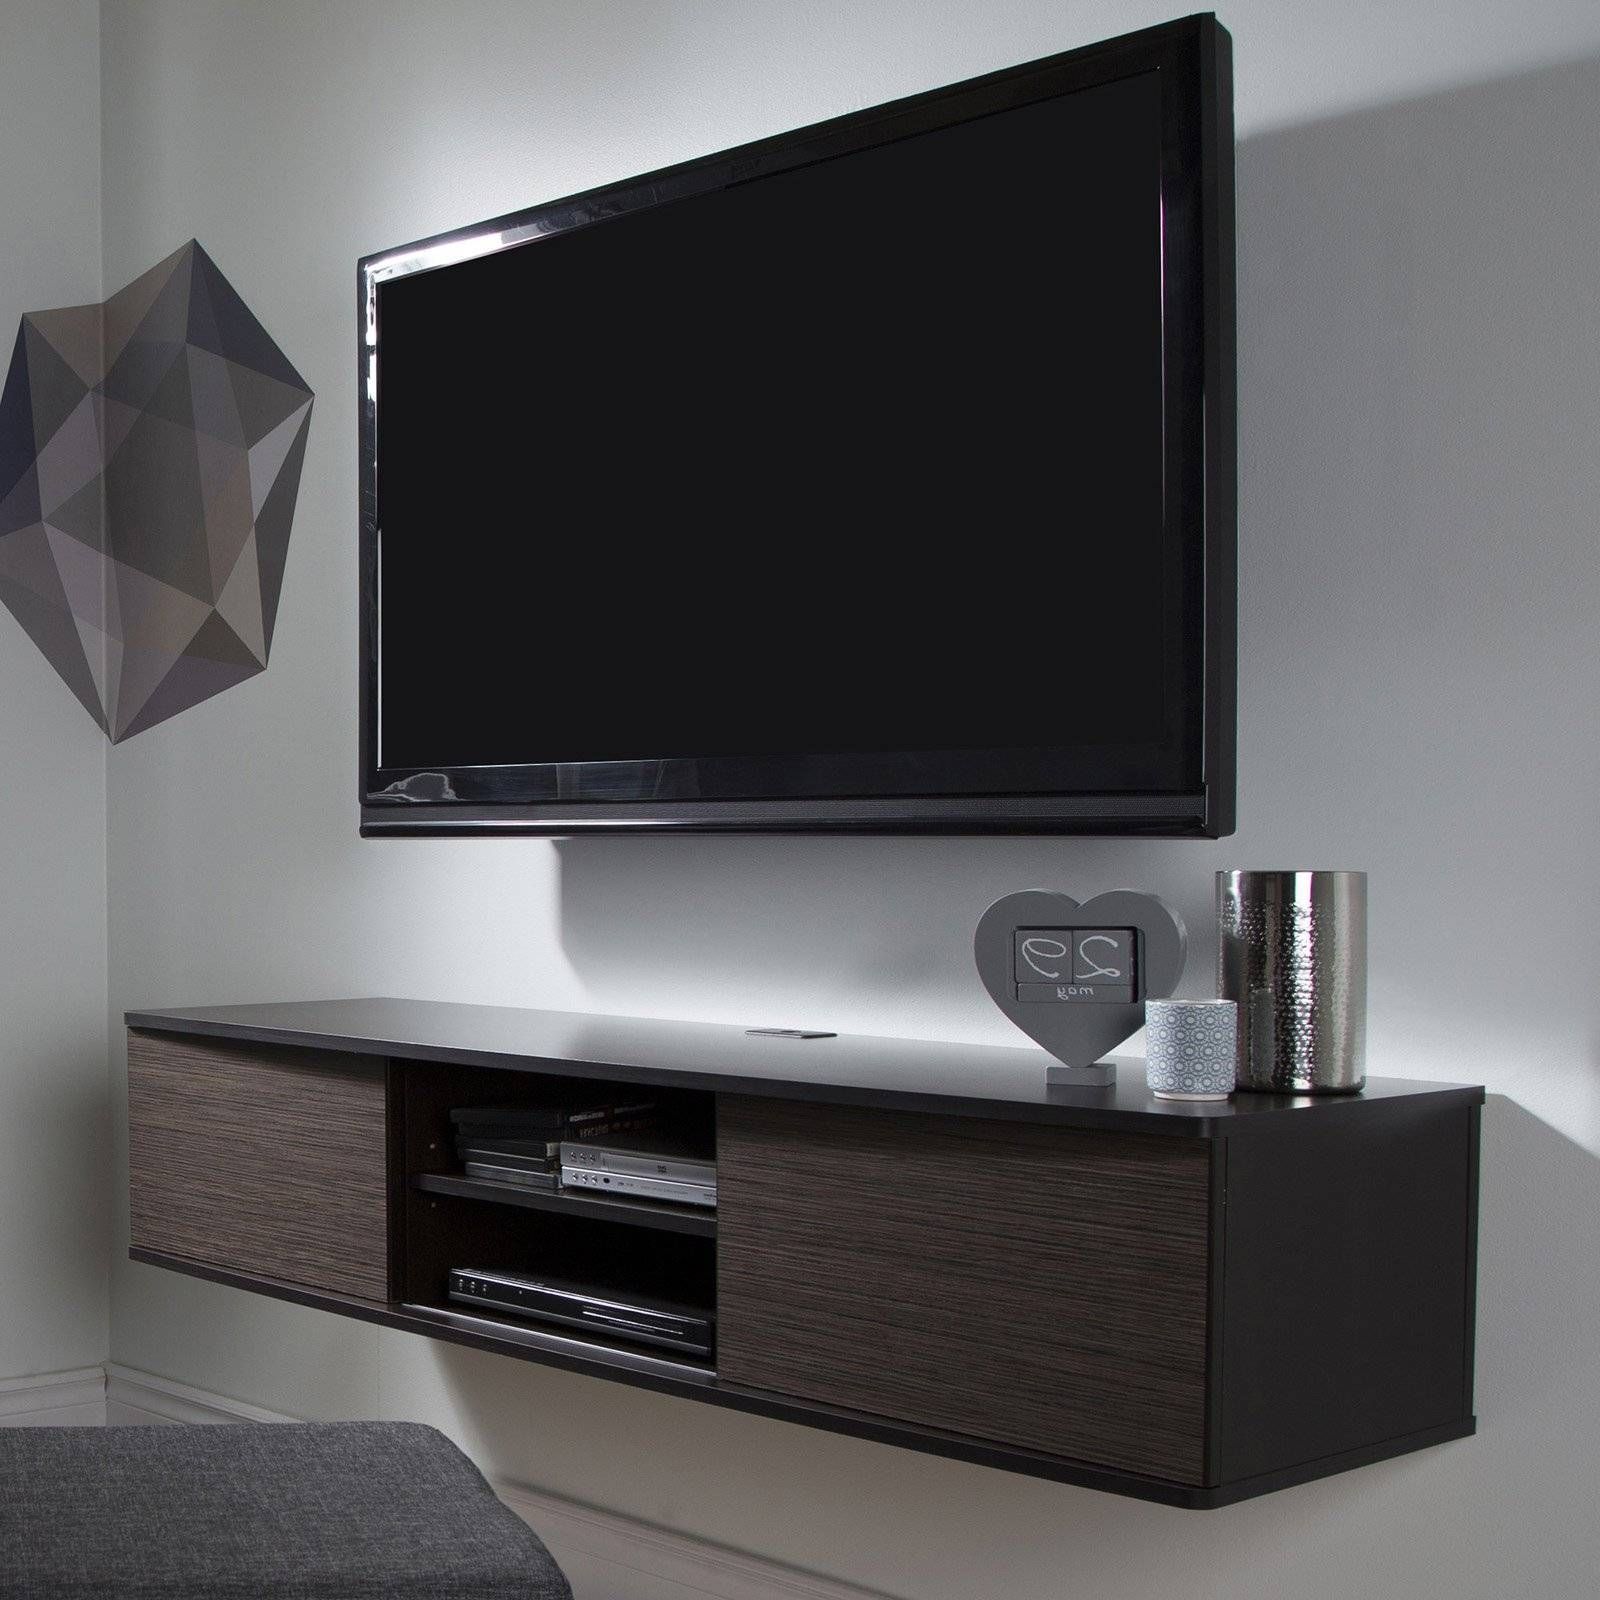 Contemporary & Modern Tv Stands | Hayneedle Within Modern Tv Stands With Mount (View 6 of 15)